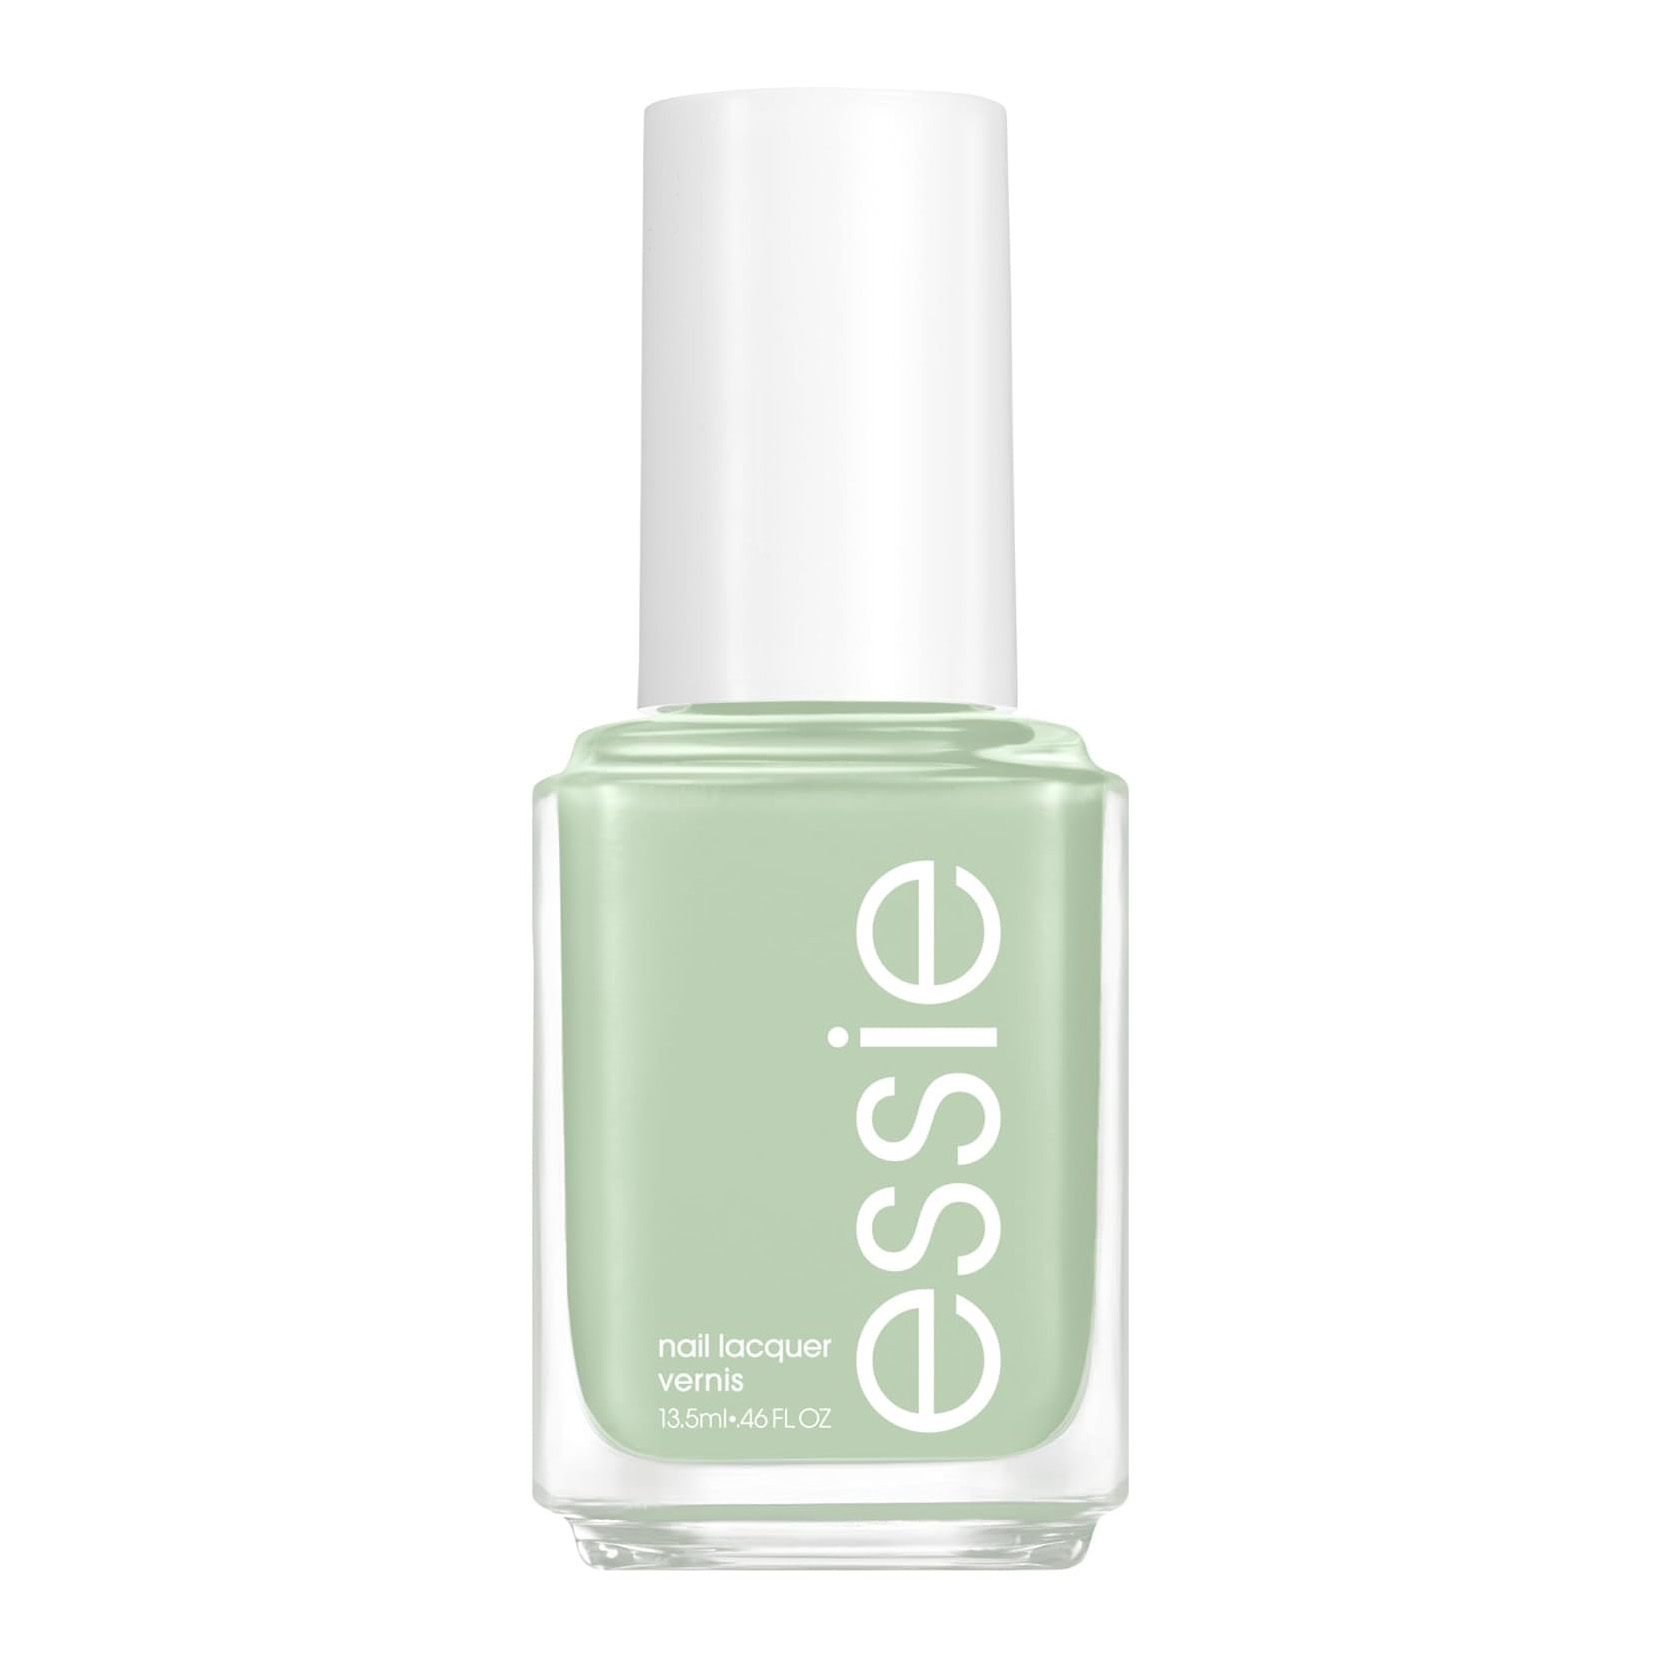 essie Salon Quality Nail Polish in the shade muted green